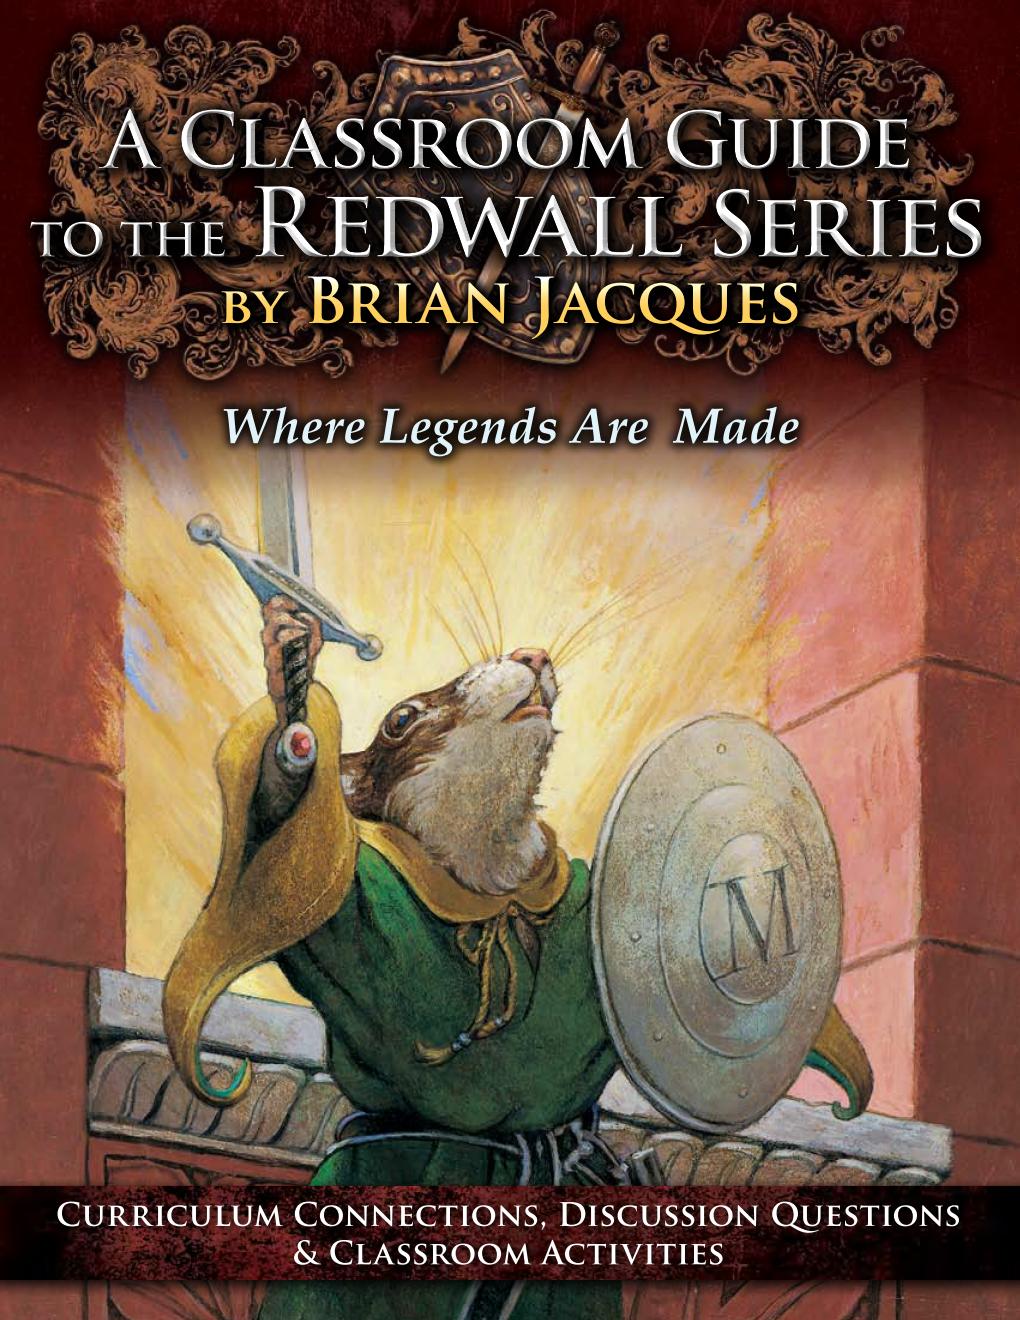 brian jacques redwall series